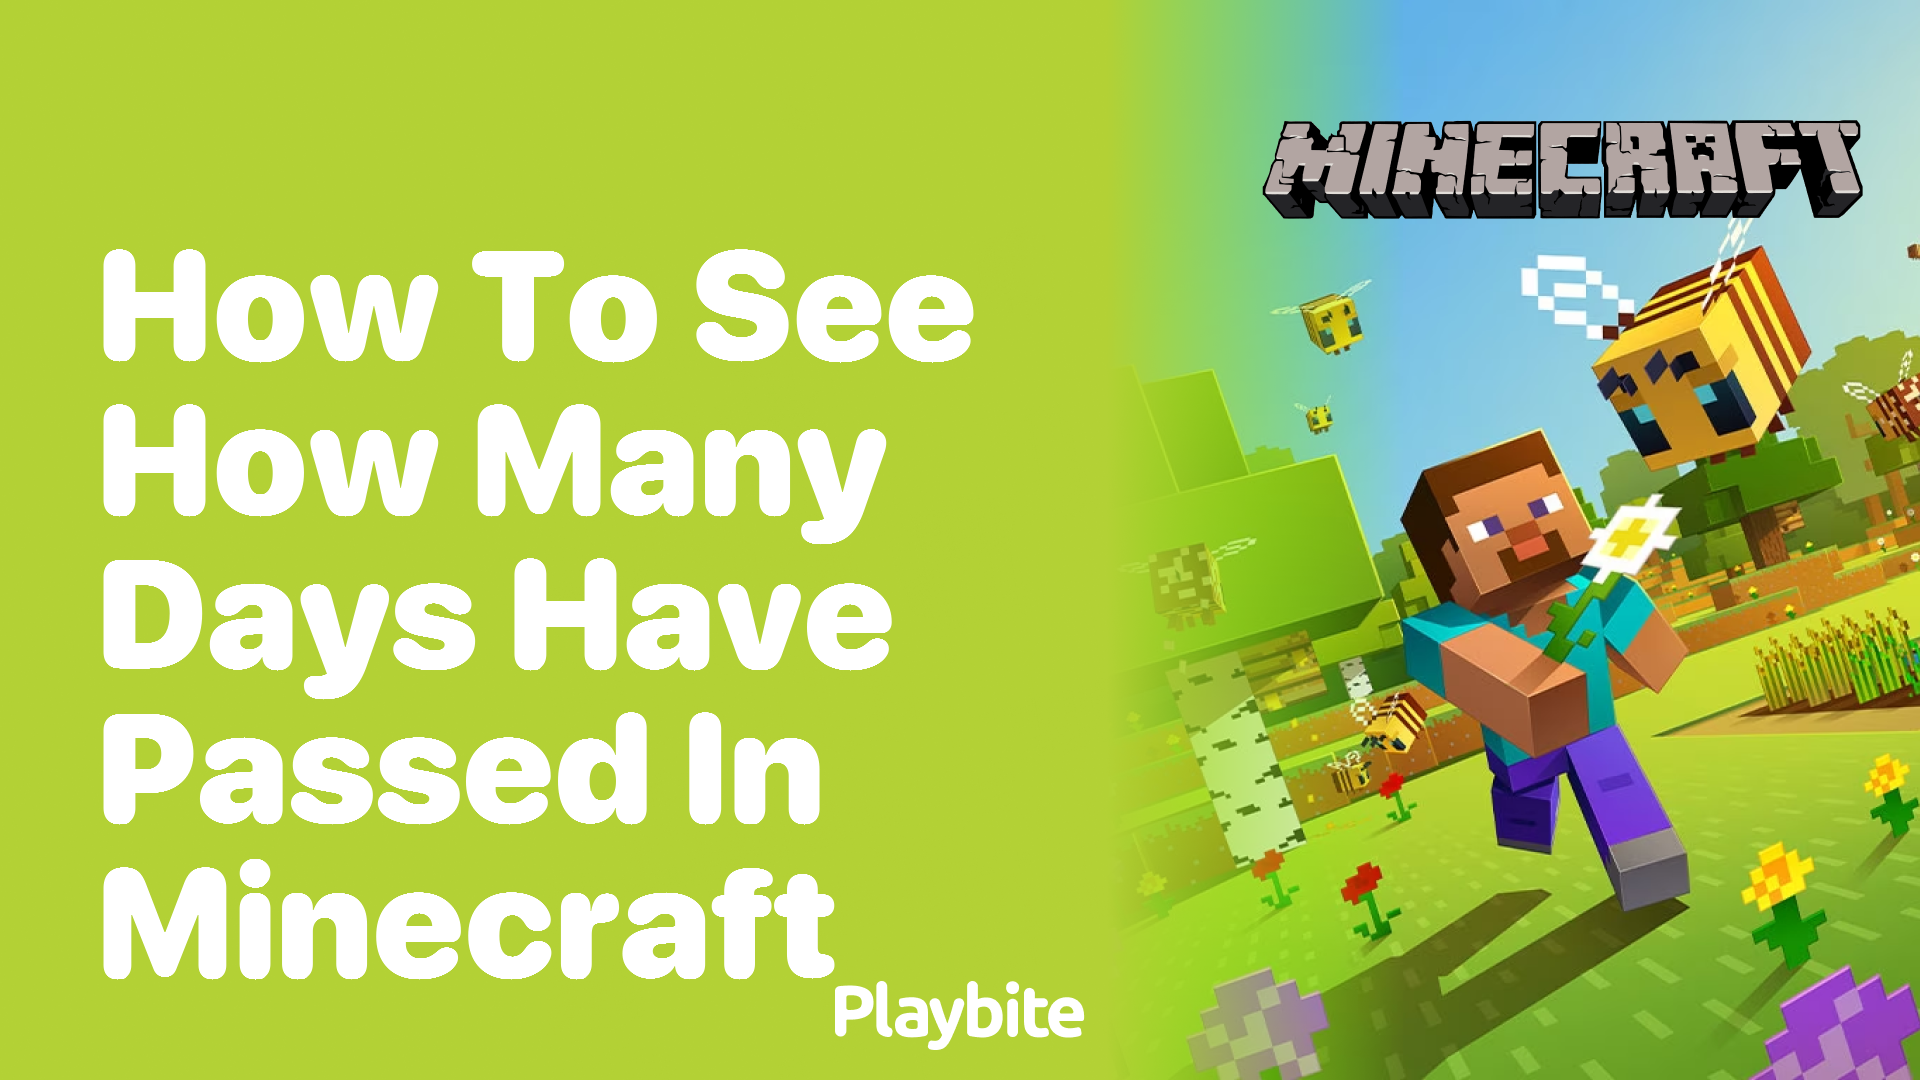 How to See How Many Days Have Passed in Minecraft - Playbite